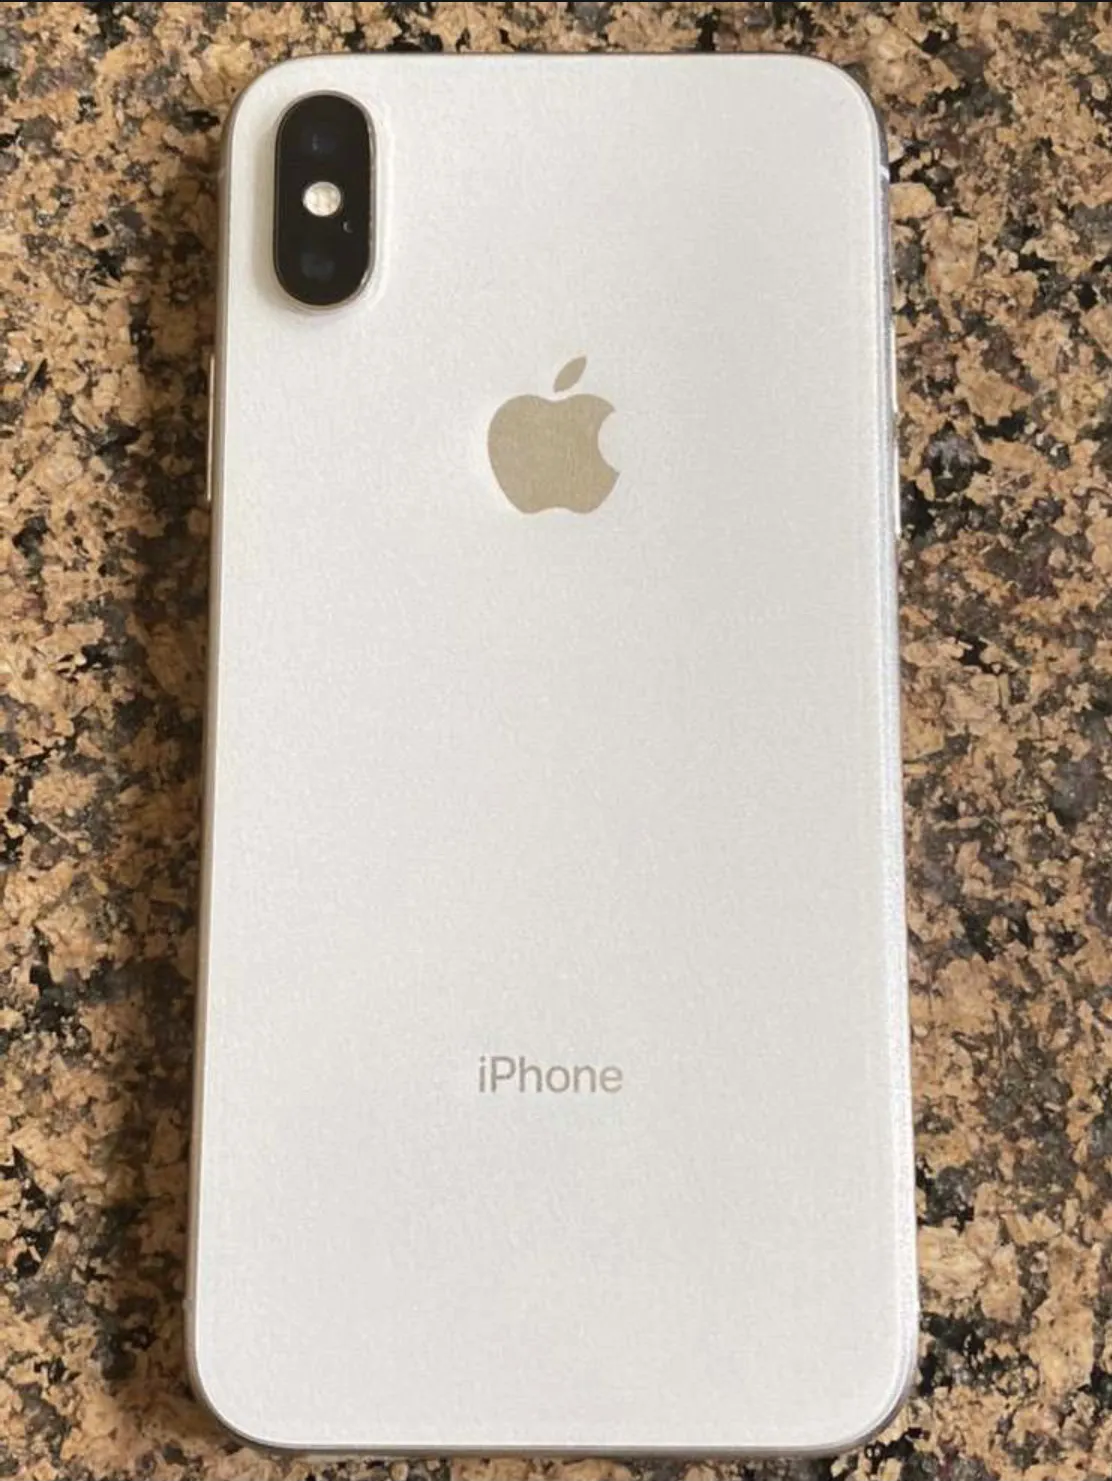 Iphone x 64gb in silver/white - photo 2